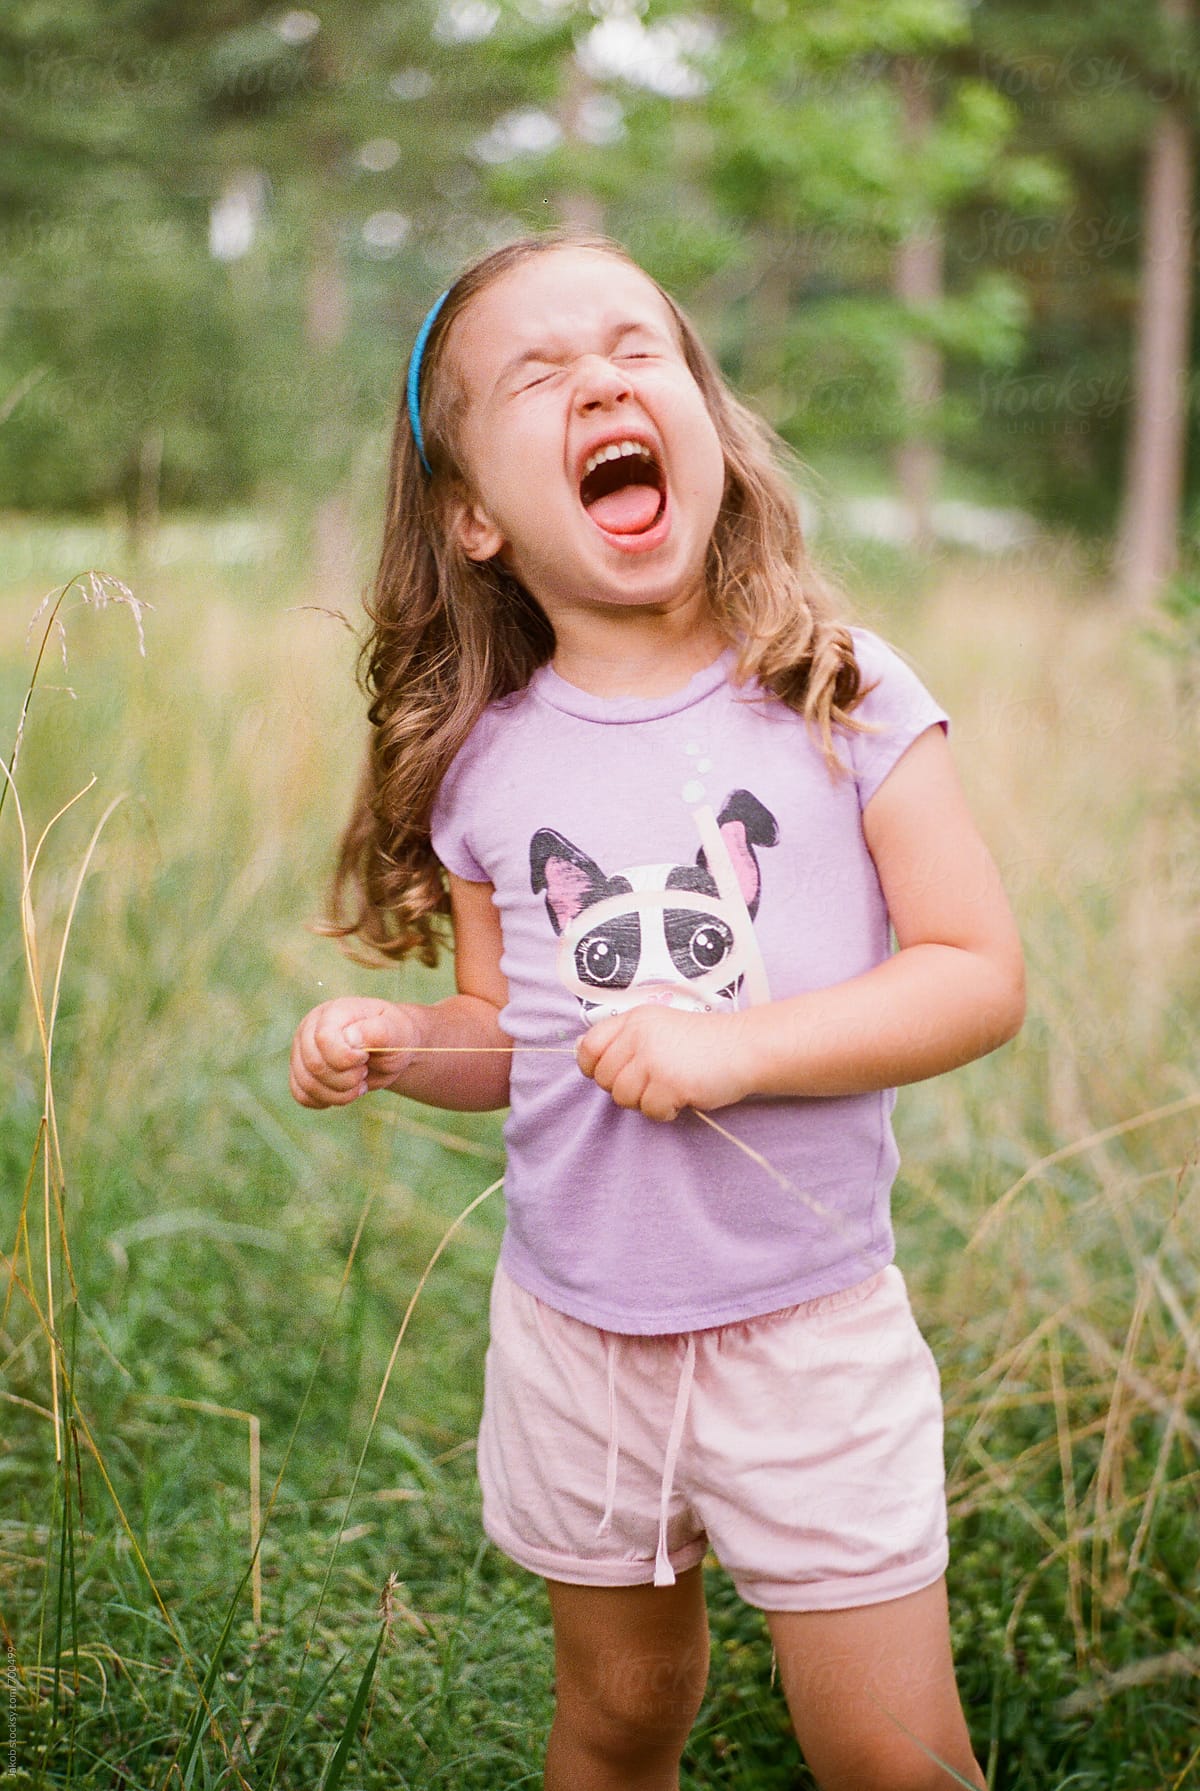 Cute Young Girl Making A Funny Face In A Field By Stocksy Contributor Jakob Lagerstedt Stocksy 